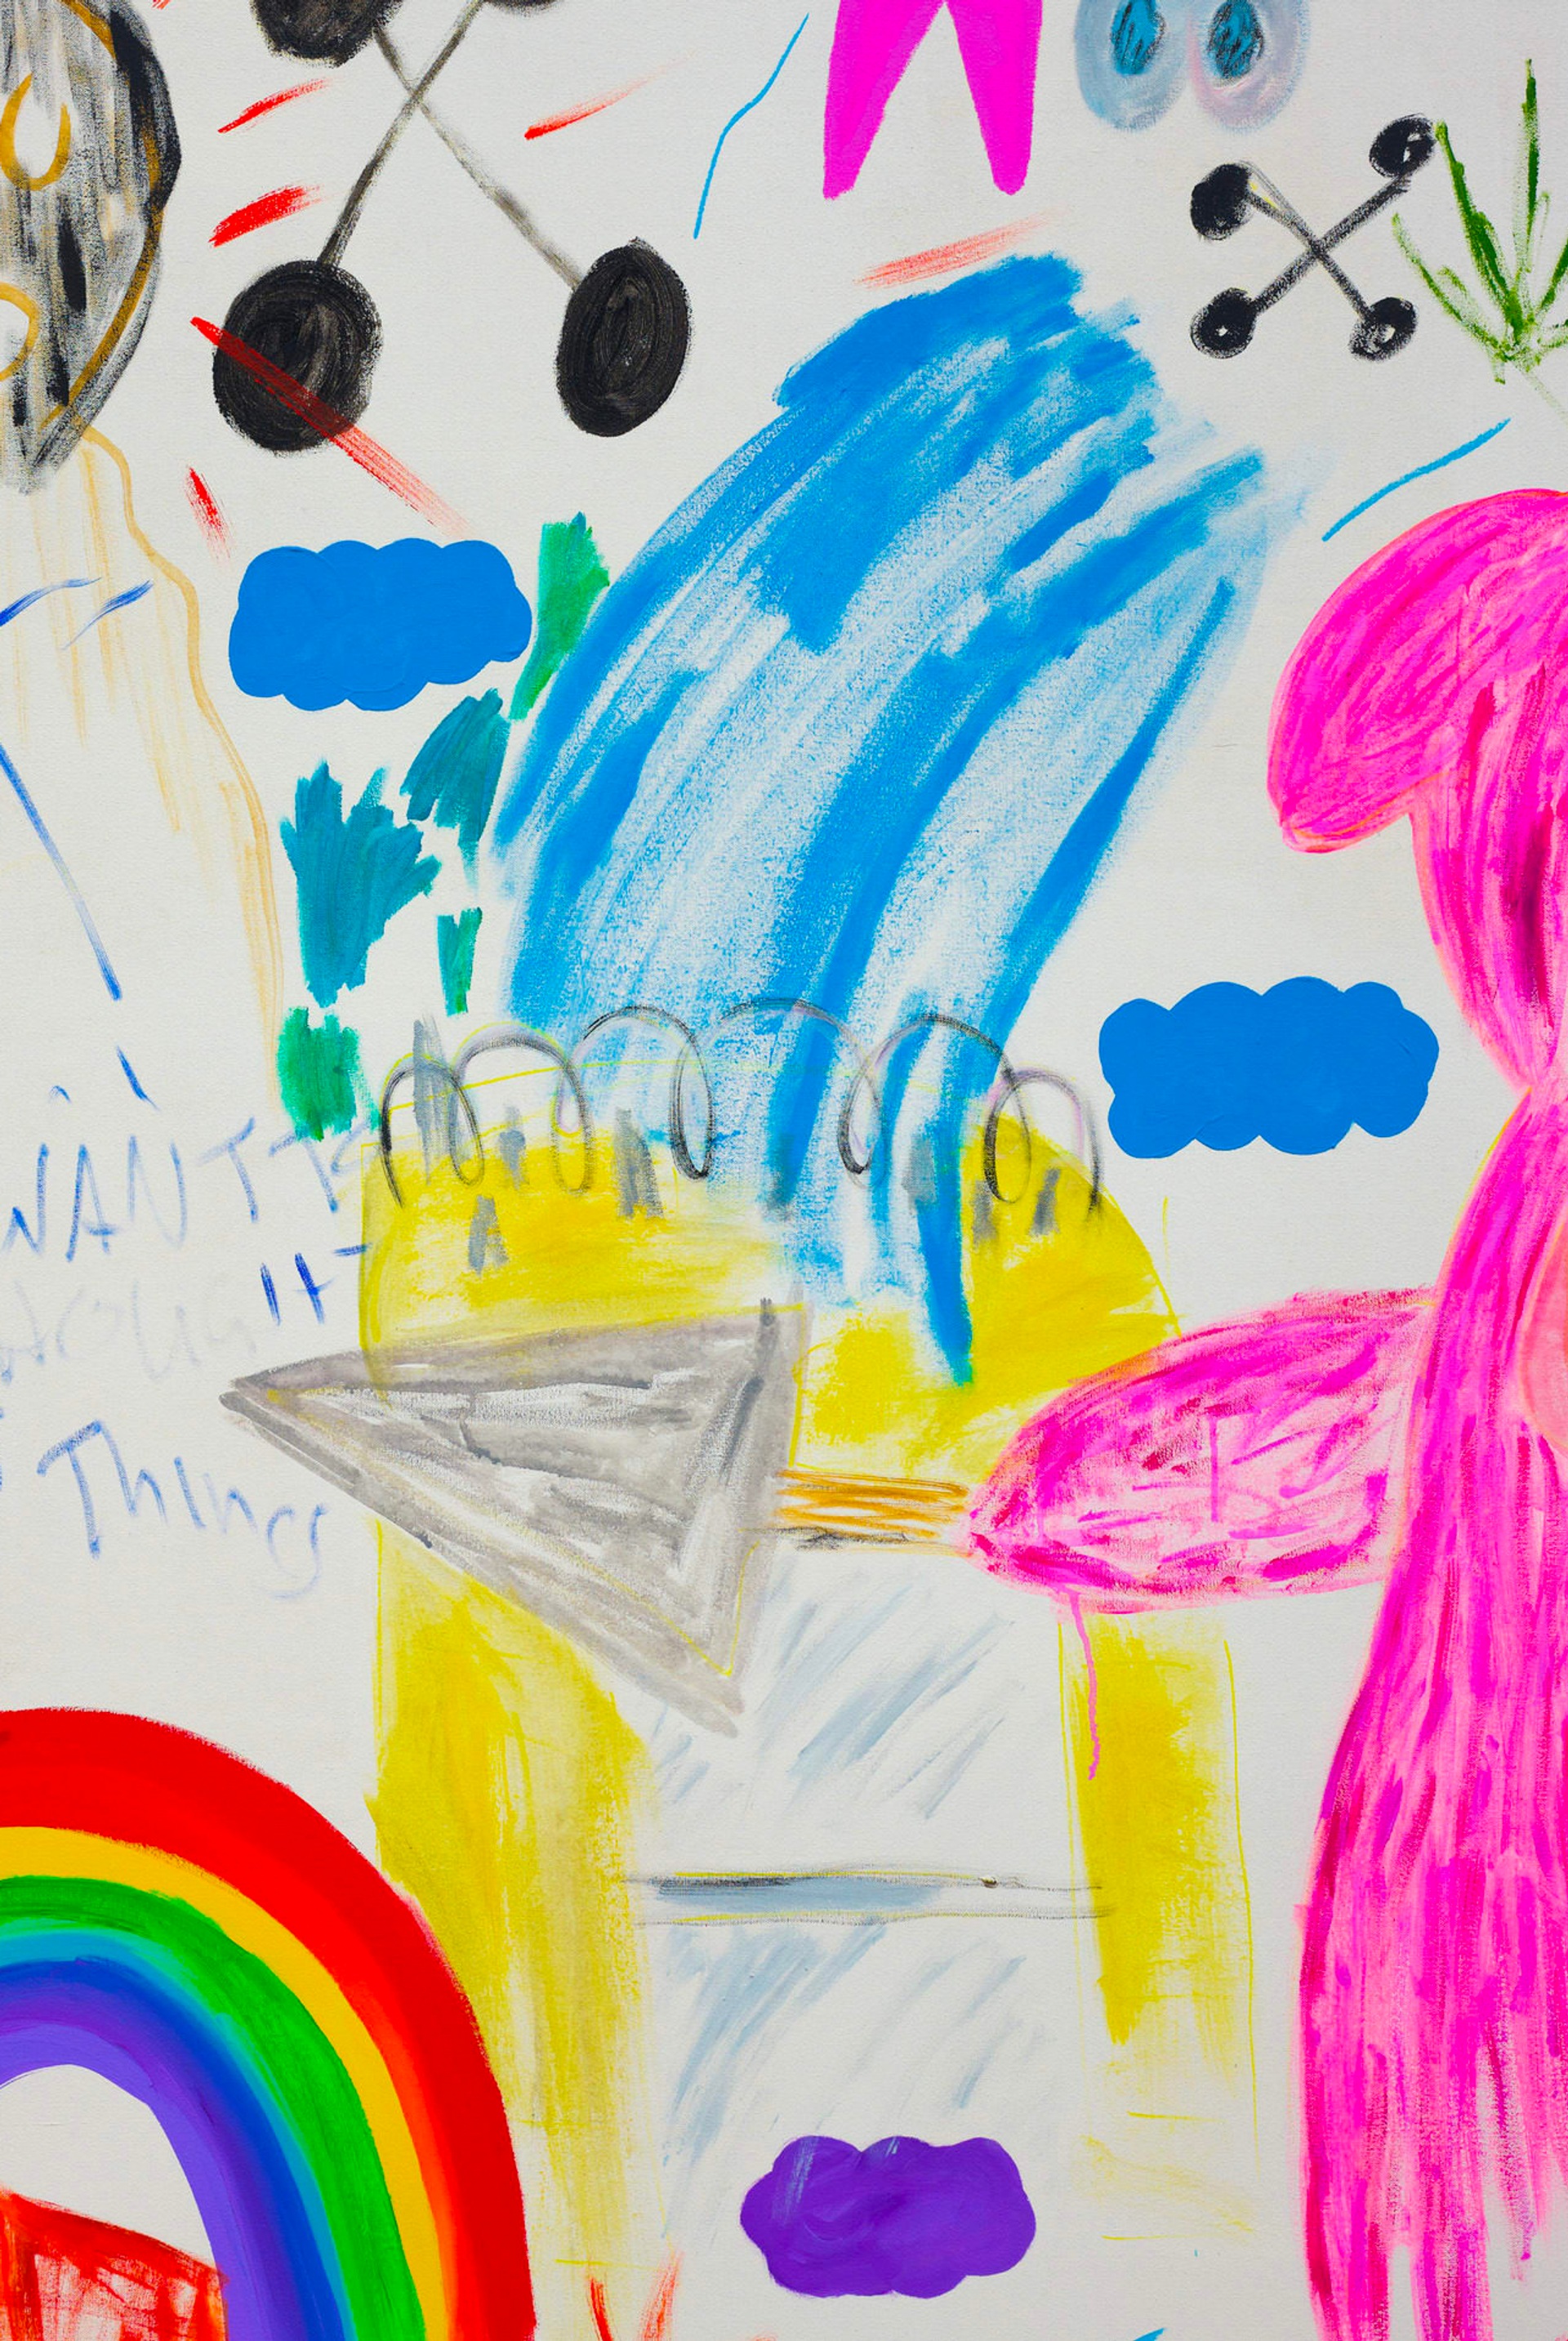 Image of various colourful shapes, handwriting and objects, including a rainbow and a creature like a teddy bear, filling the white background.  By Aoibhin Maguire